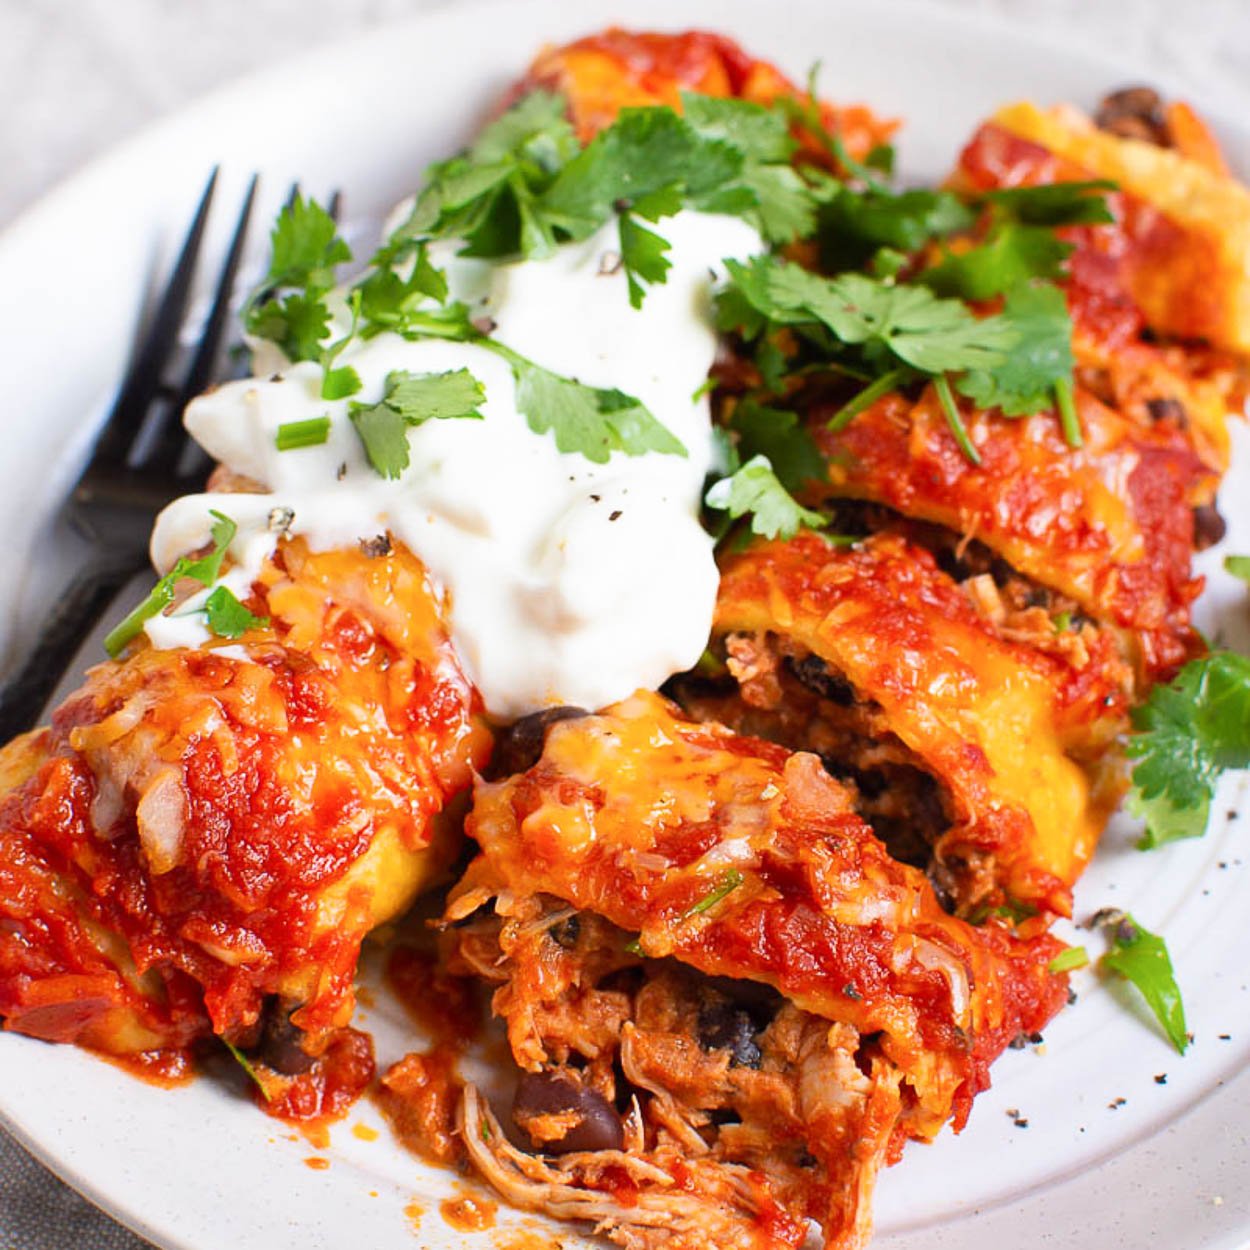 healthy chicken enchilada recipe baked in oven and ready to eat